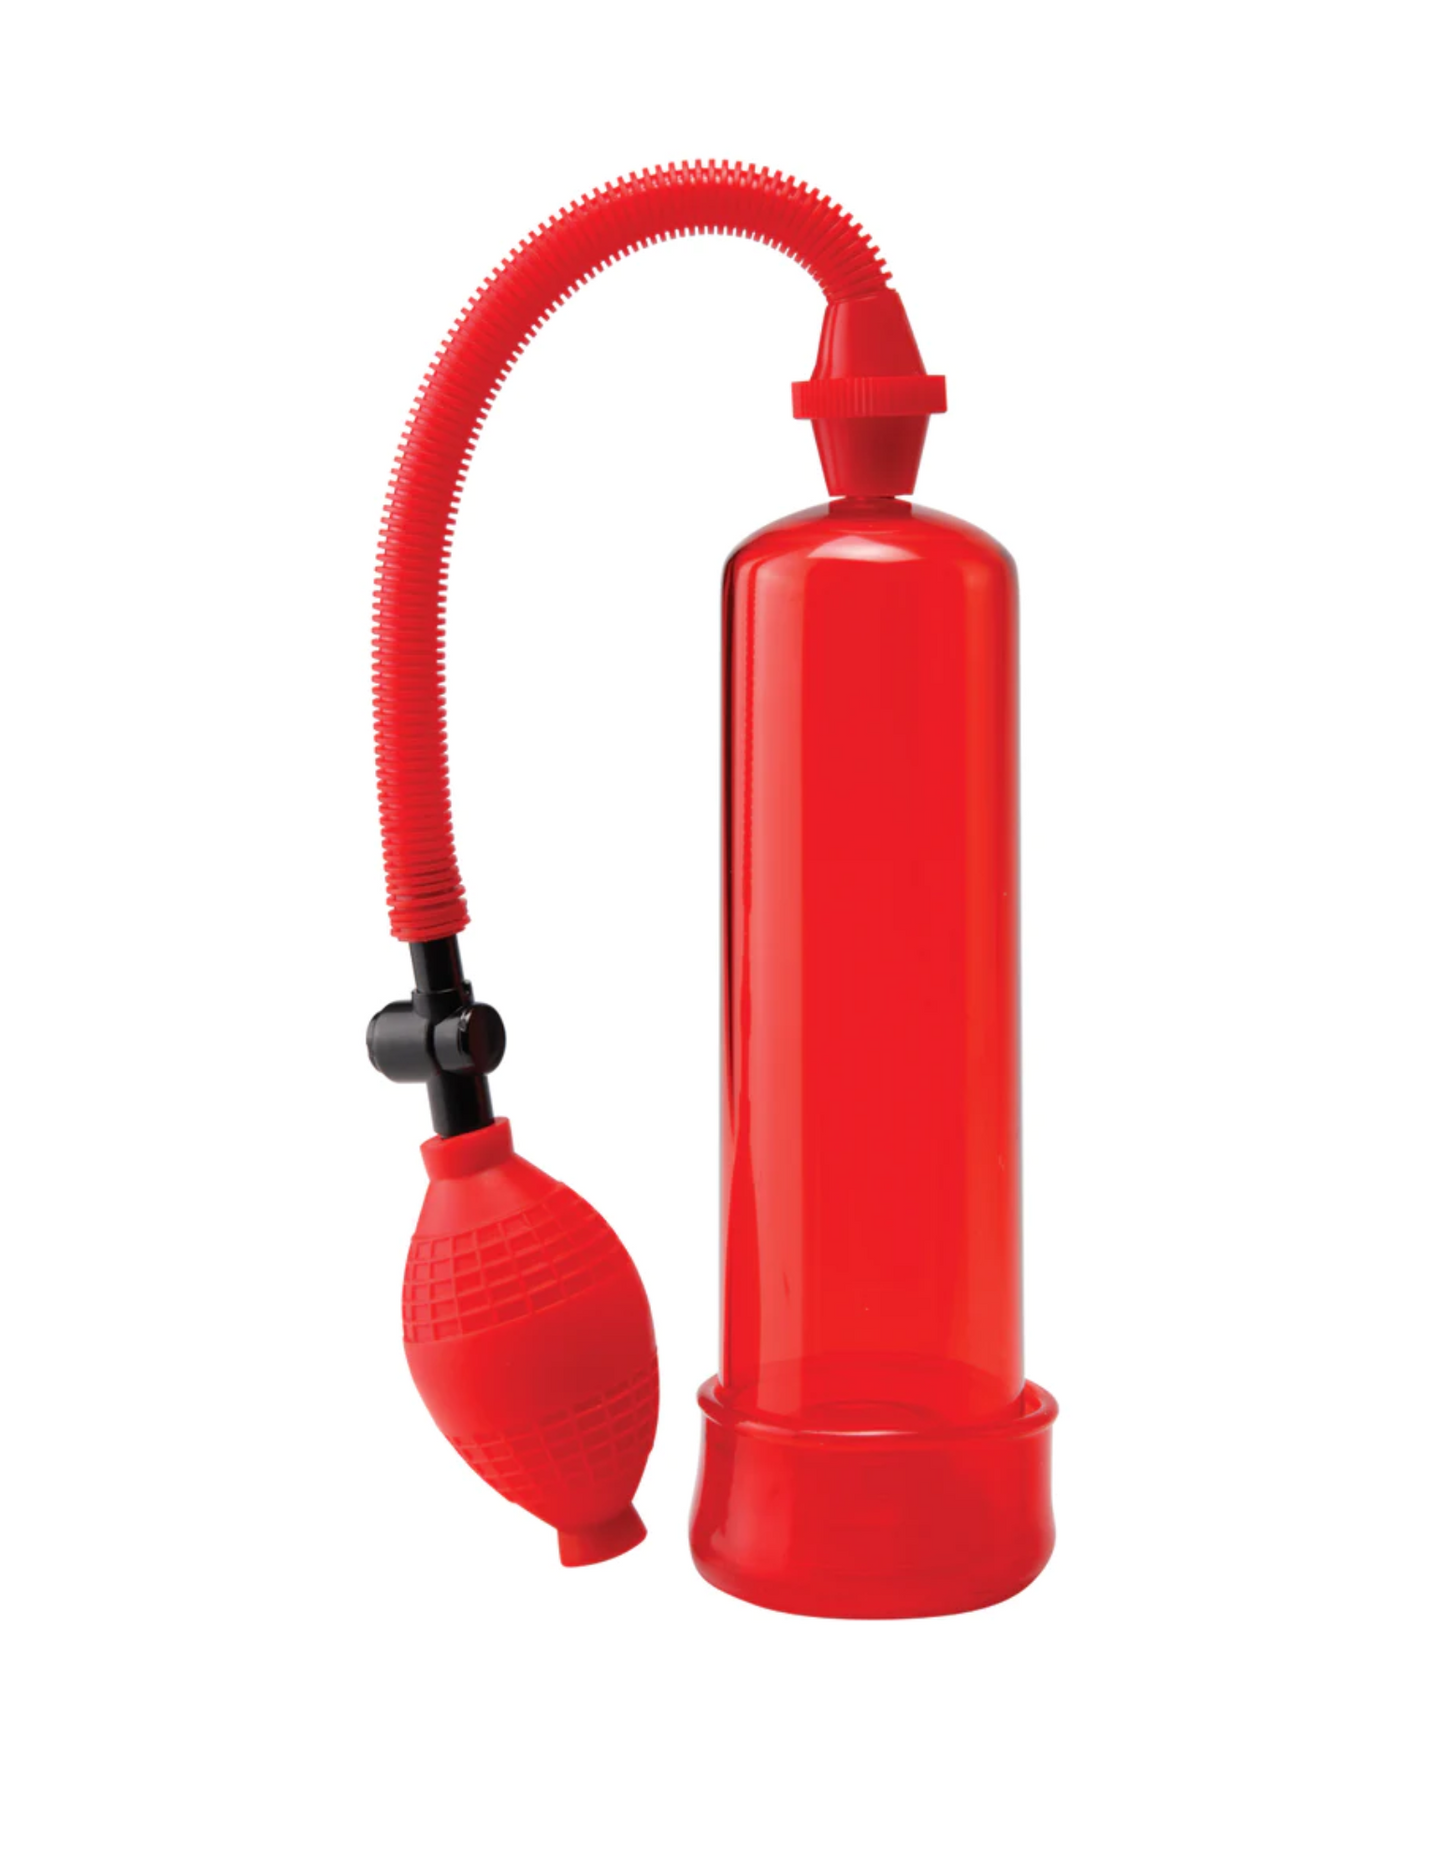 Front view of the Pump Worx Beginner's Penis Enlargement System from Pipedreams (red) shows its handheld pump bulb, valve and vacuum tube.